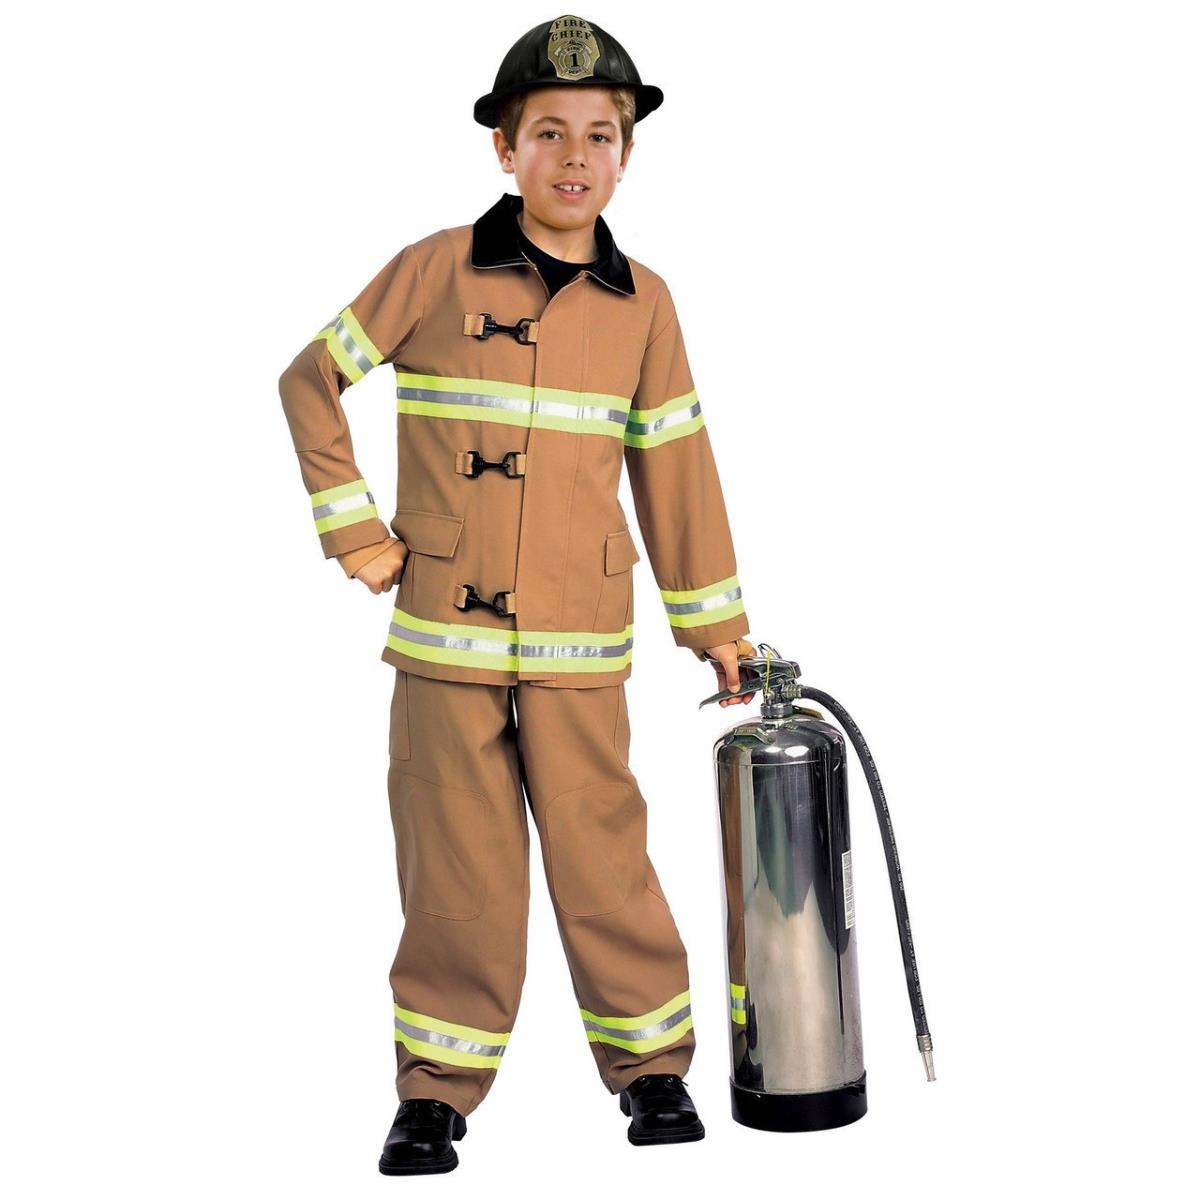 286782 Firefighter Kids Costume, Small